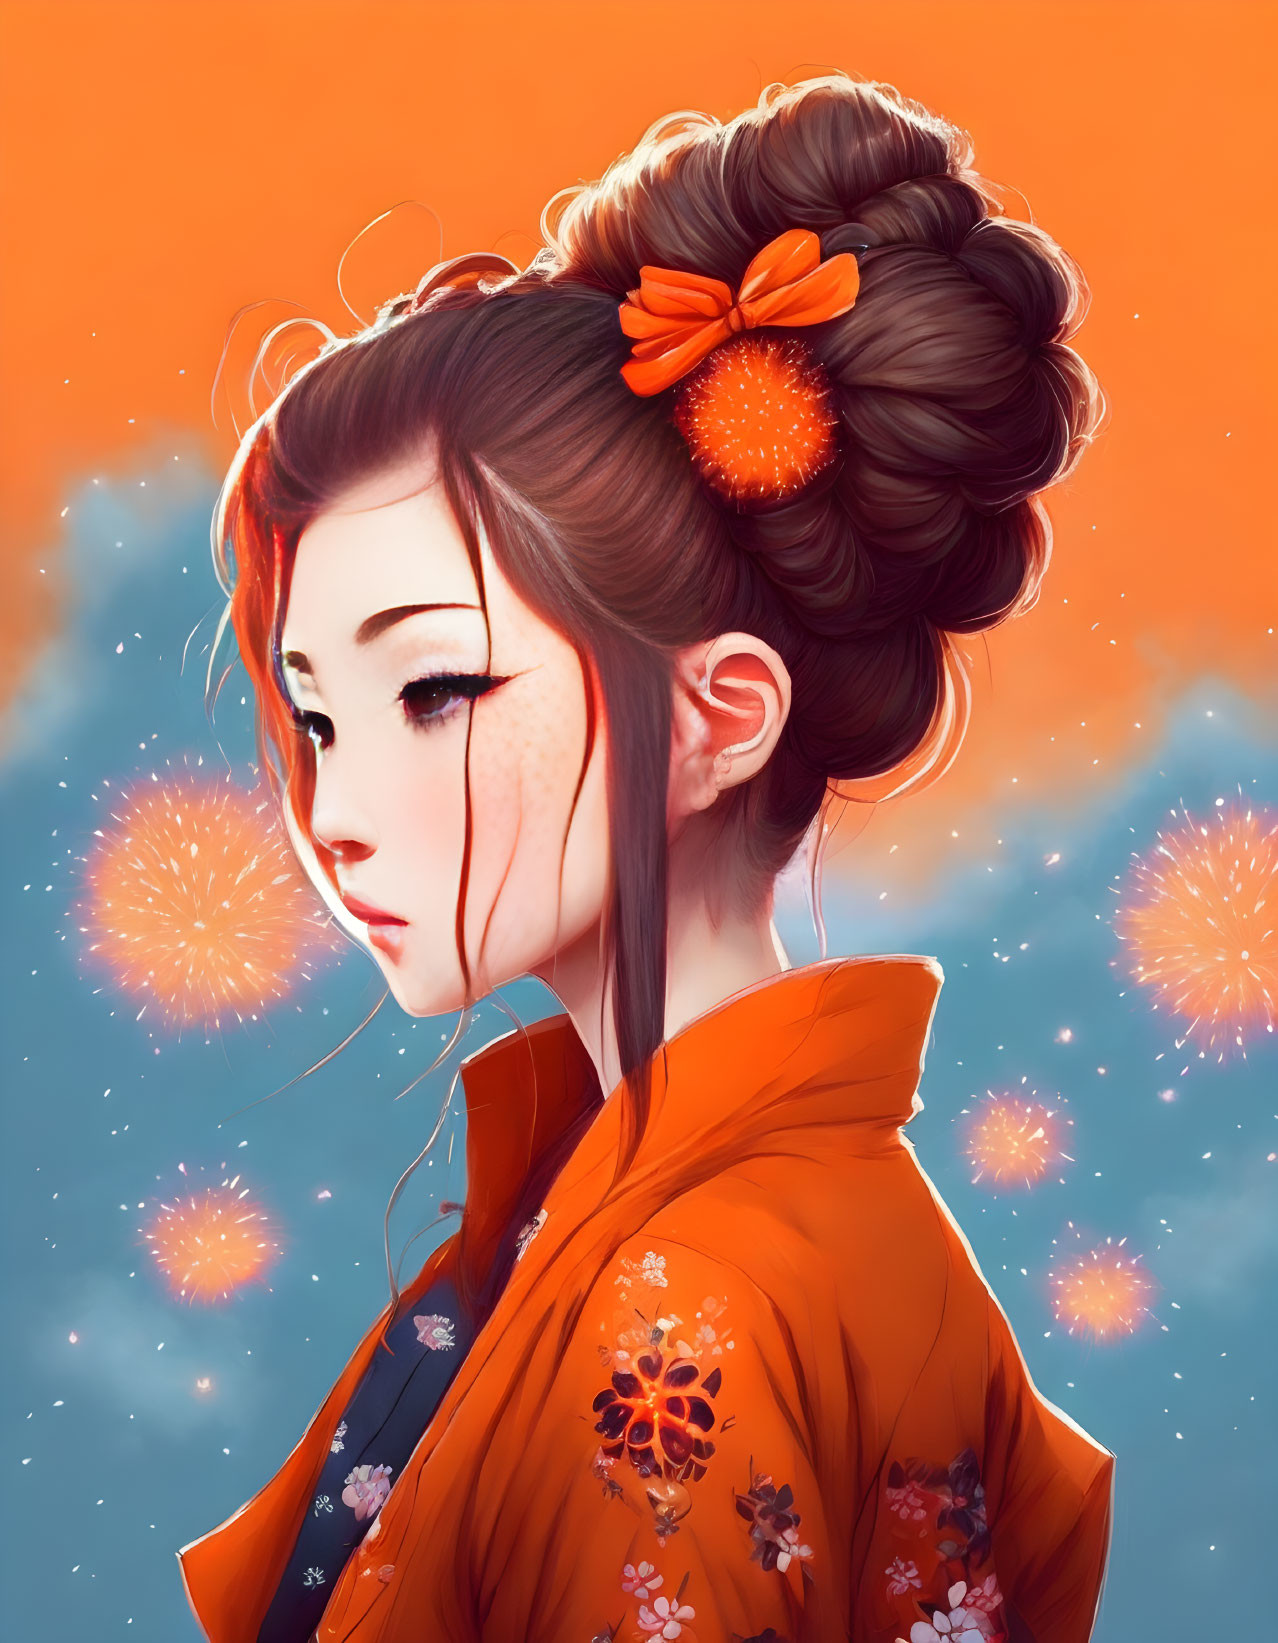 Profile view of woman with elaborate bun and orange flower accessory in traditional outfit, with floral patterns against fireworks